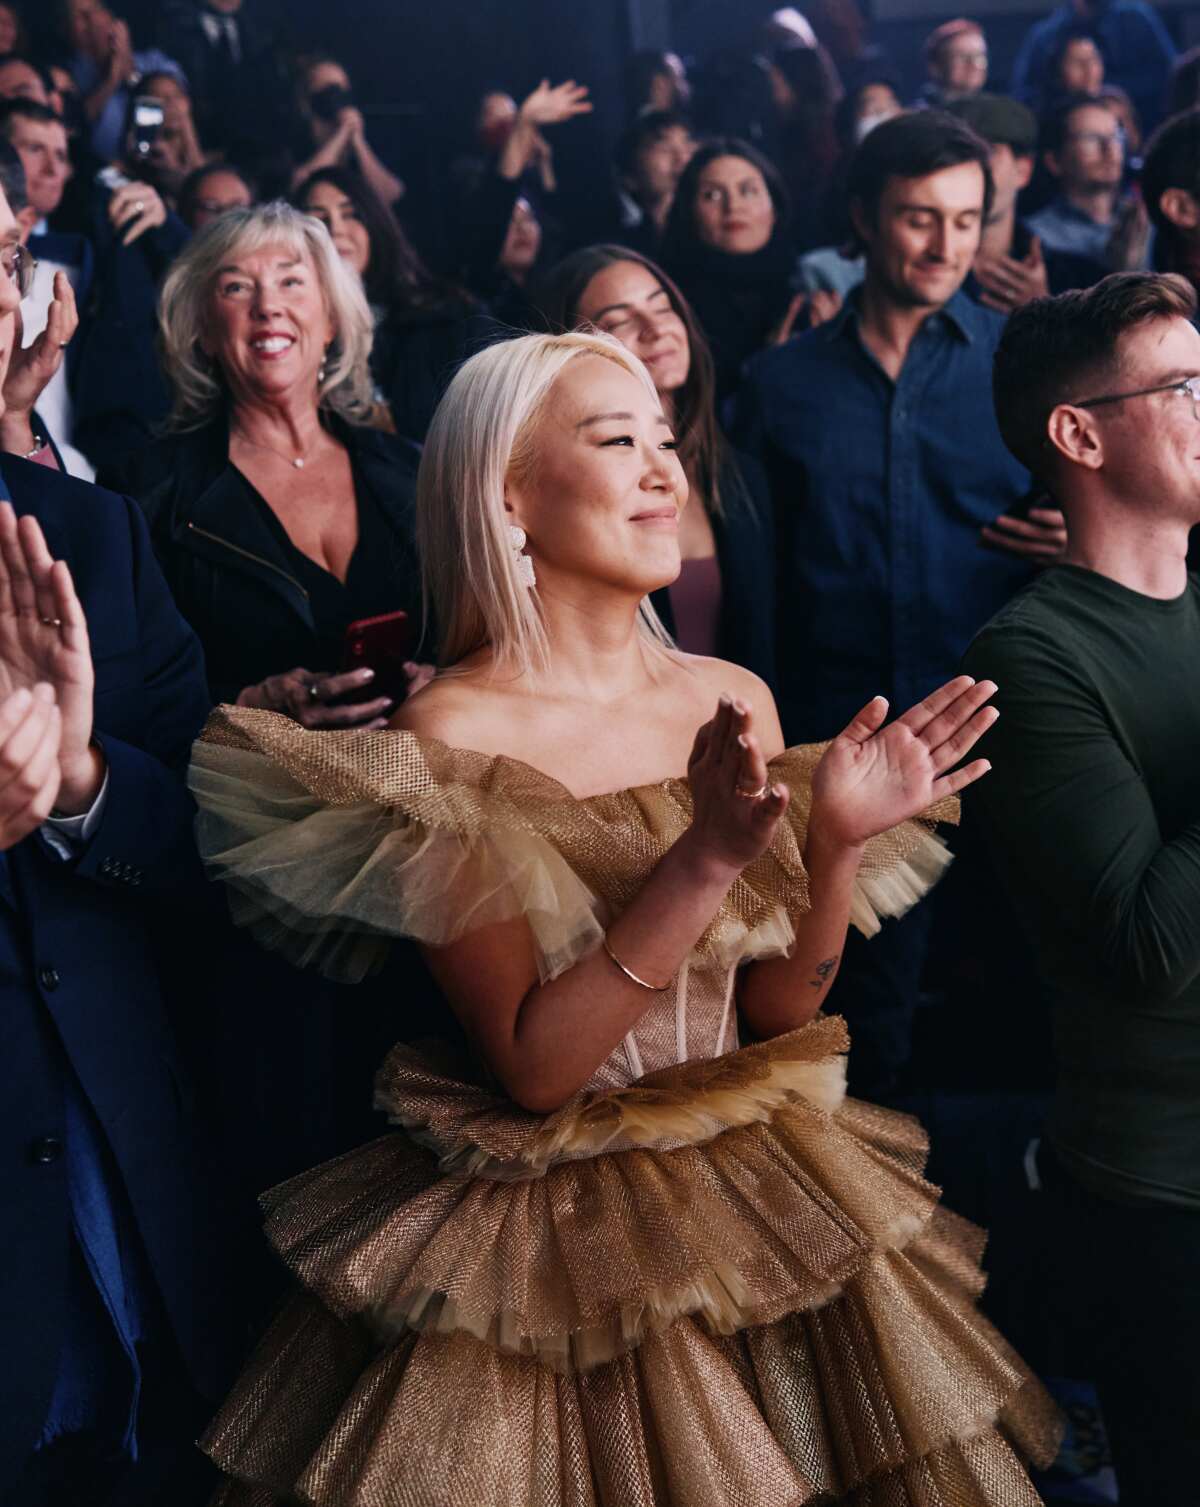 A woman claps along to a performance.